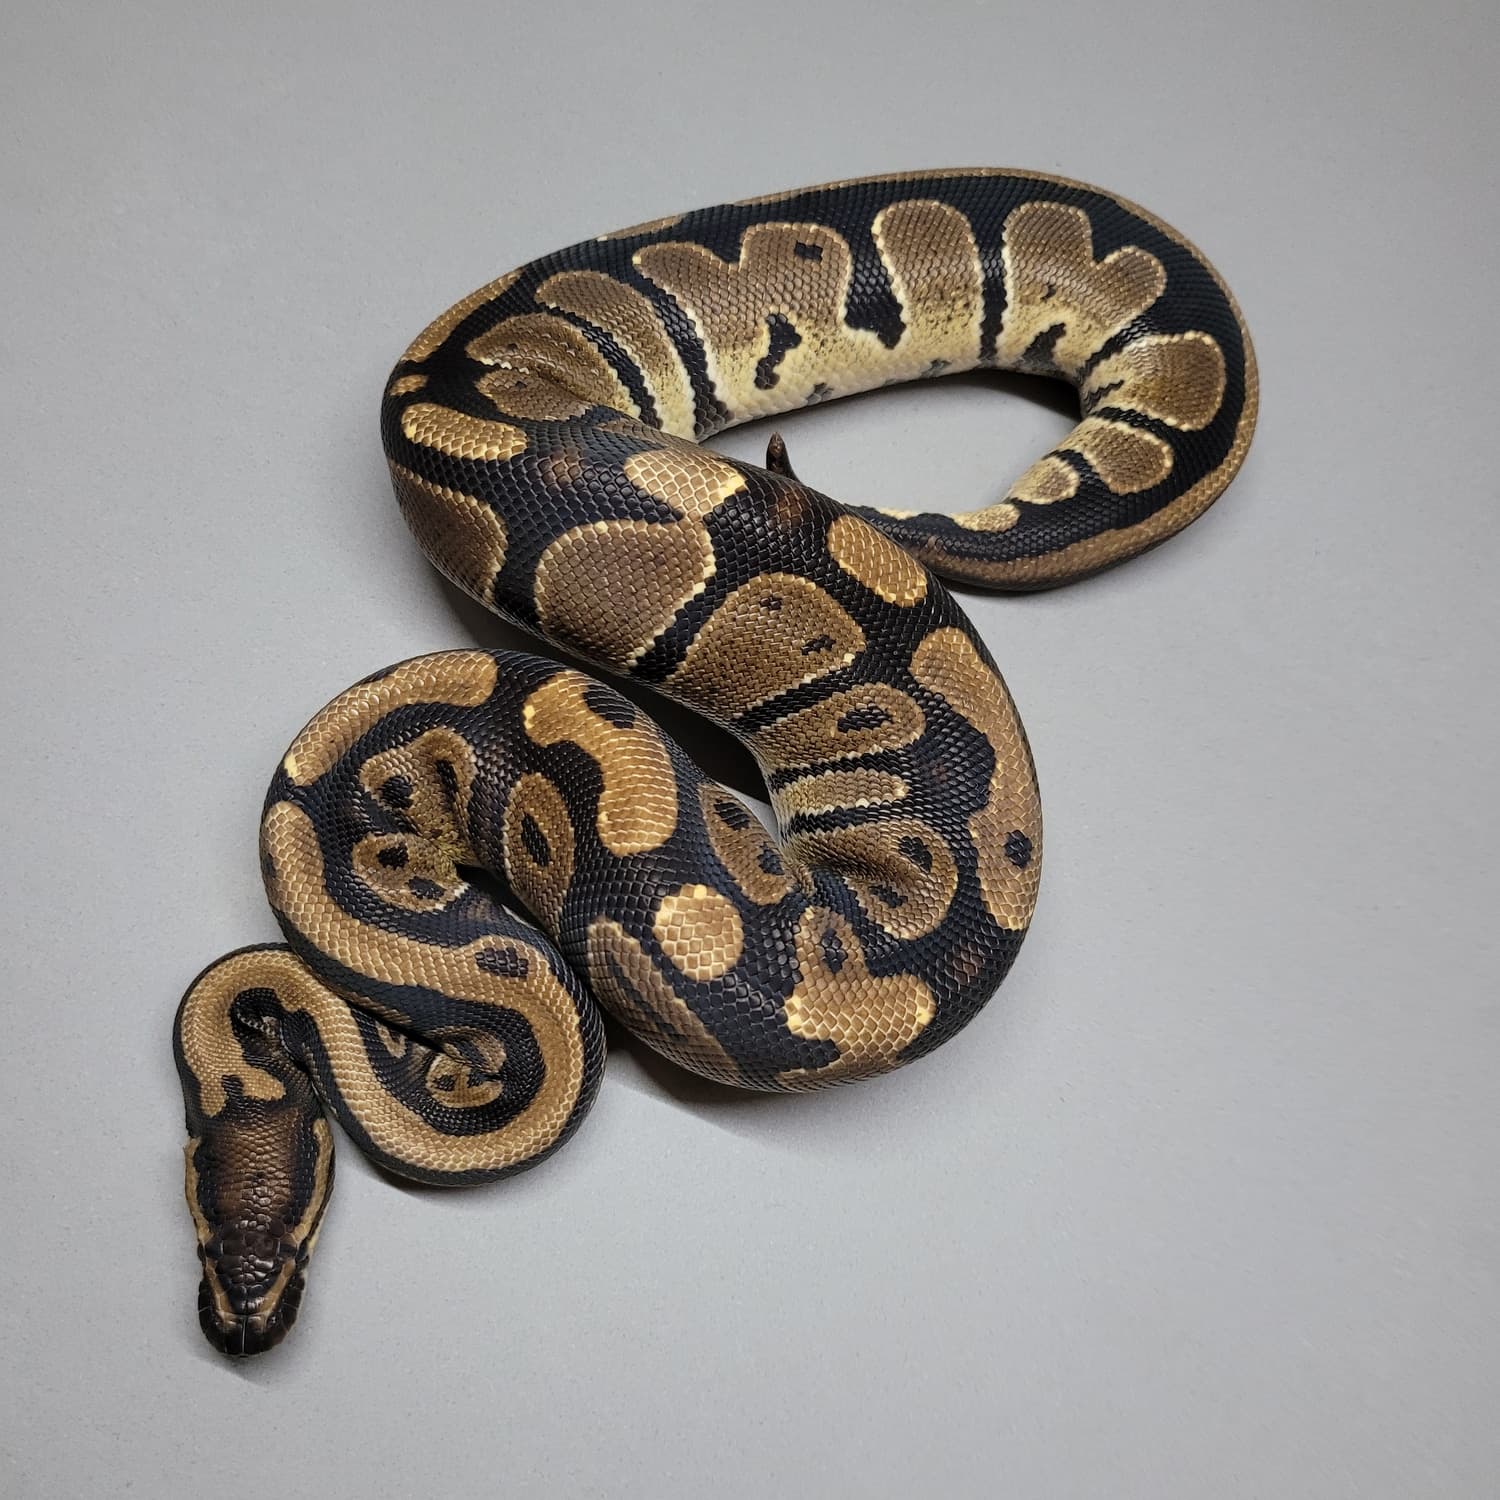 Gene X Het Pied Ball Python by Coppinger Reptile Co.